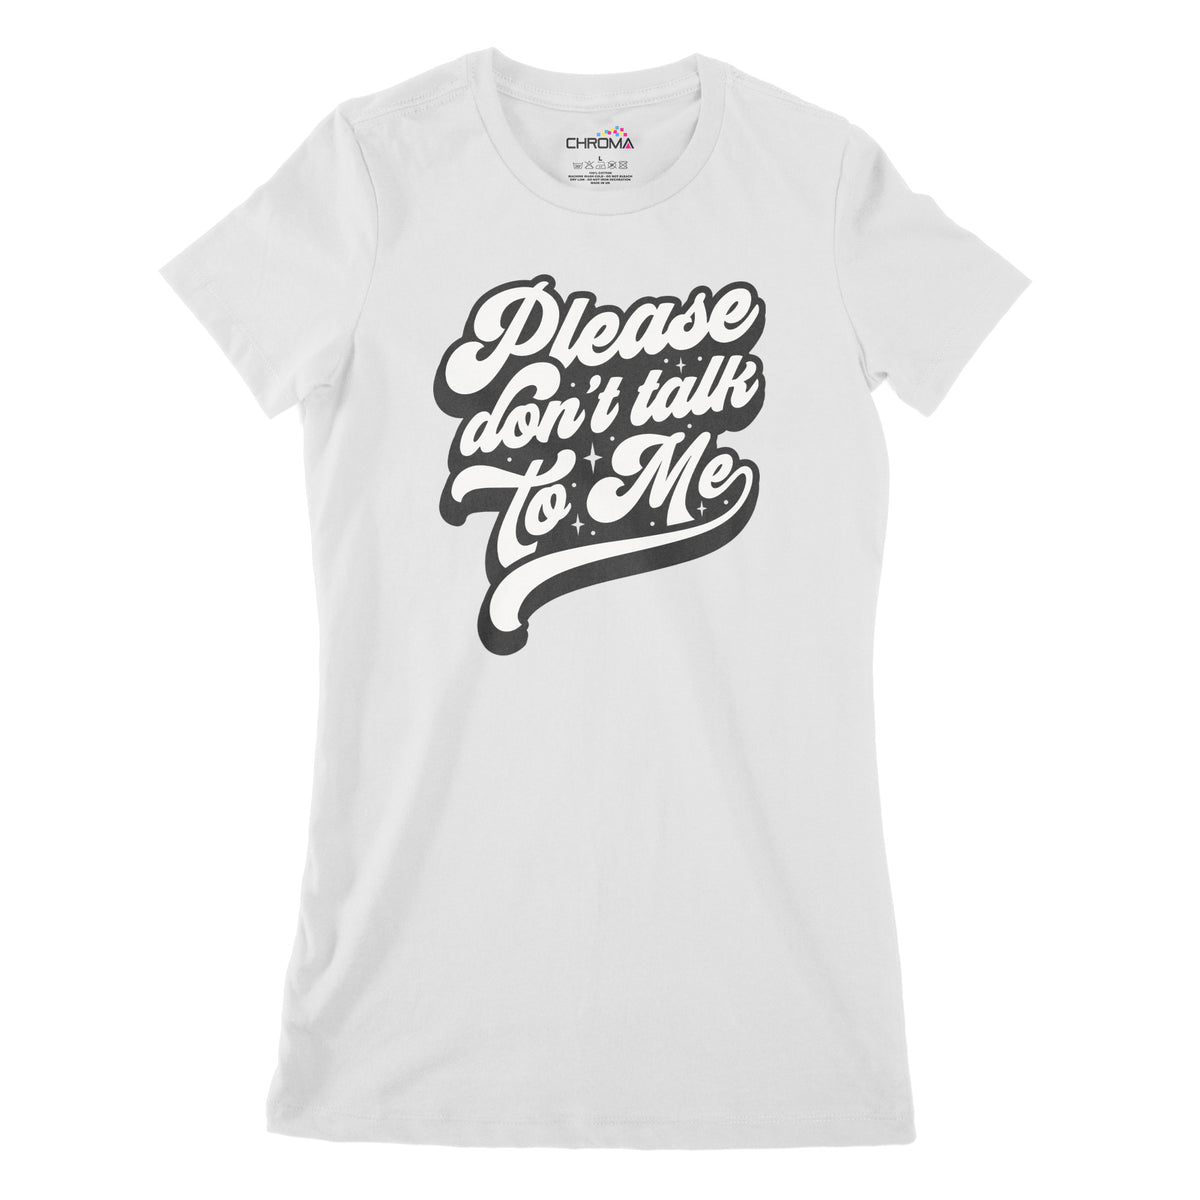 Please Don't Talk To Me | Women's Classic Fitted T-Shirt Chroma Clothing